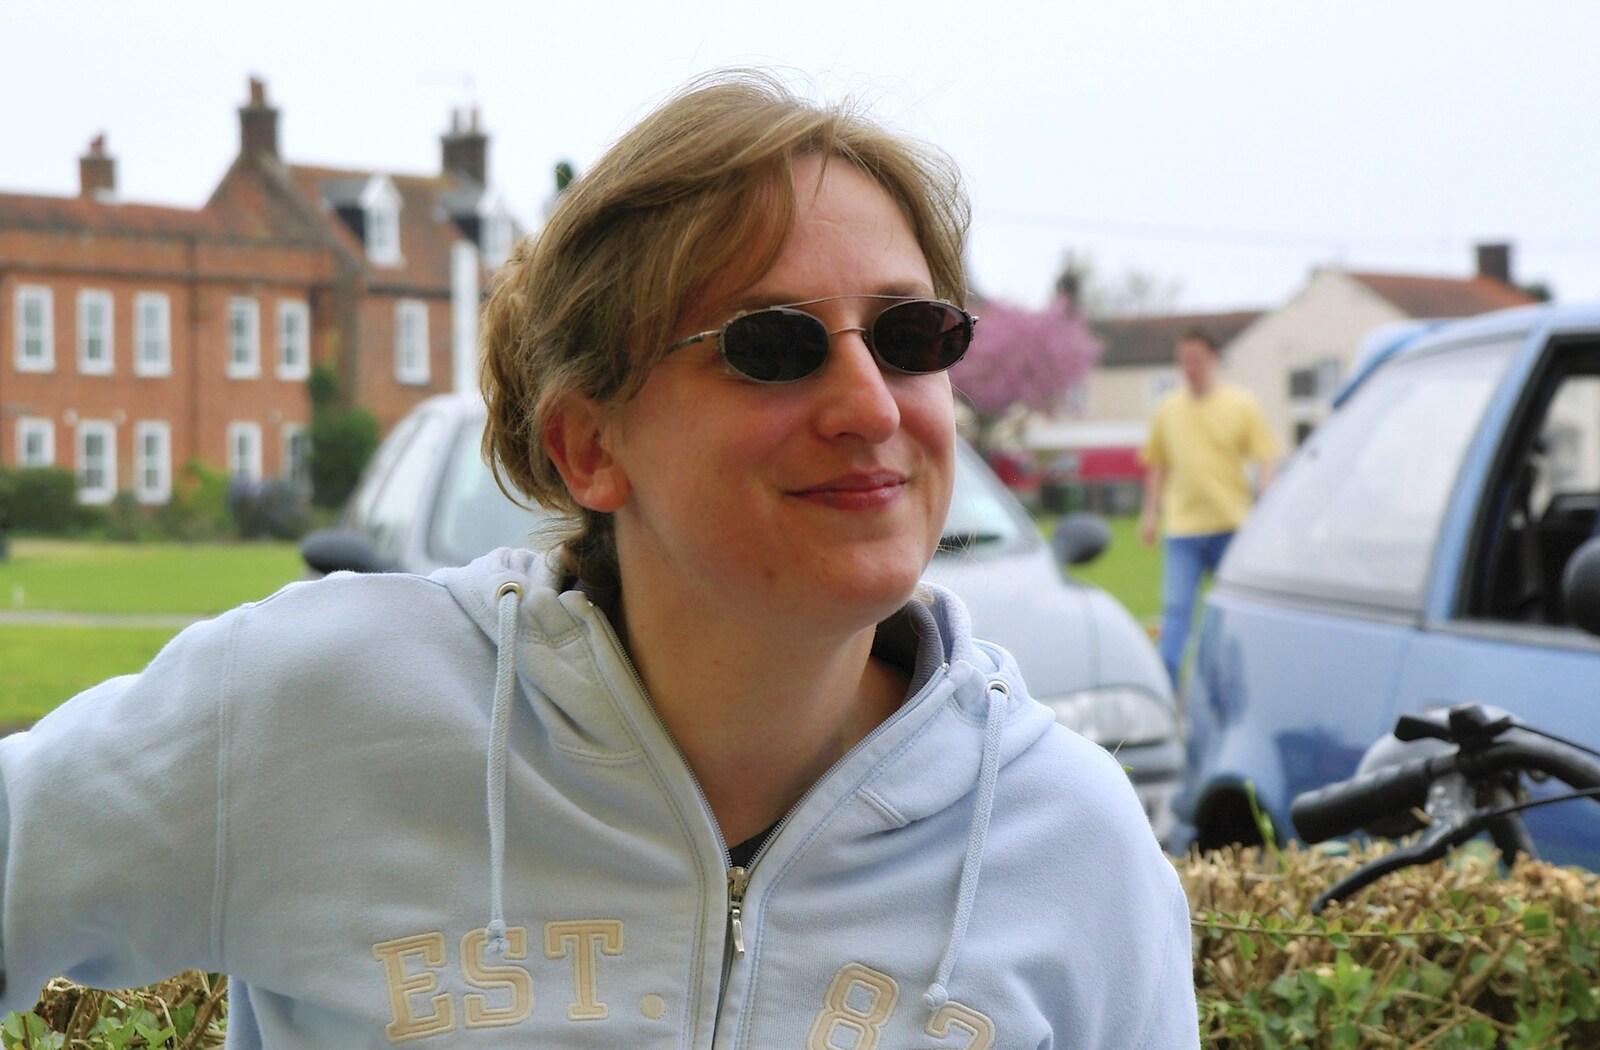 Suey from The BSCC does The Pheasant Hotel, Kelling, Norfolk - 6th May 2006